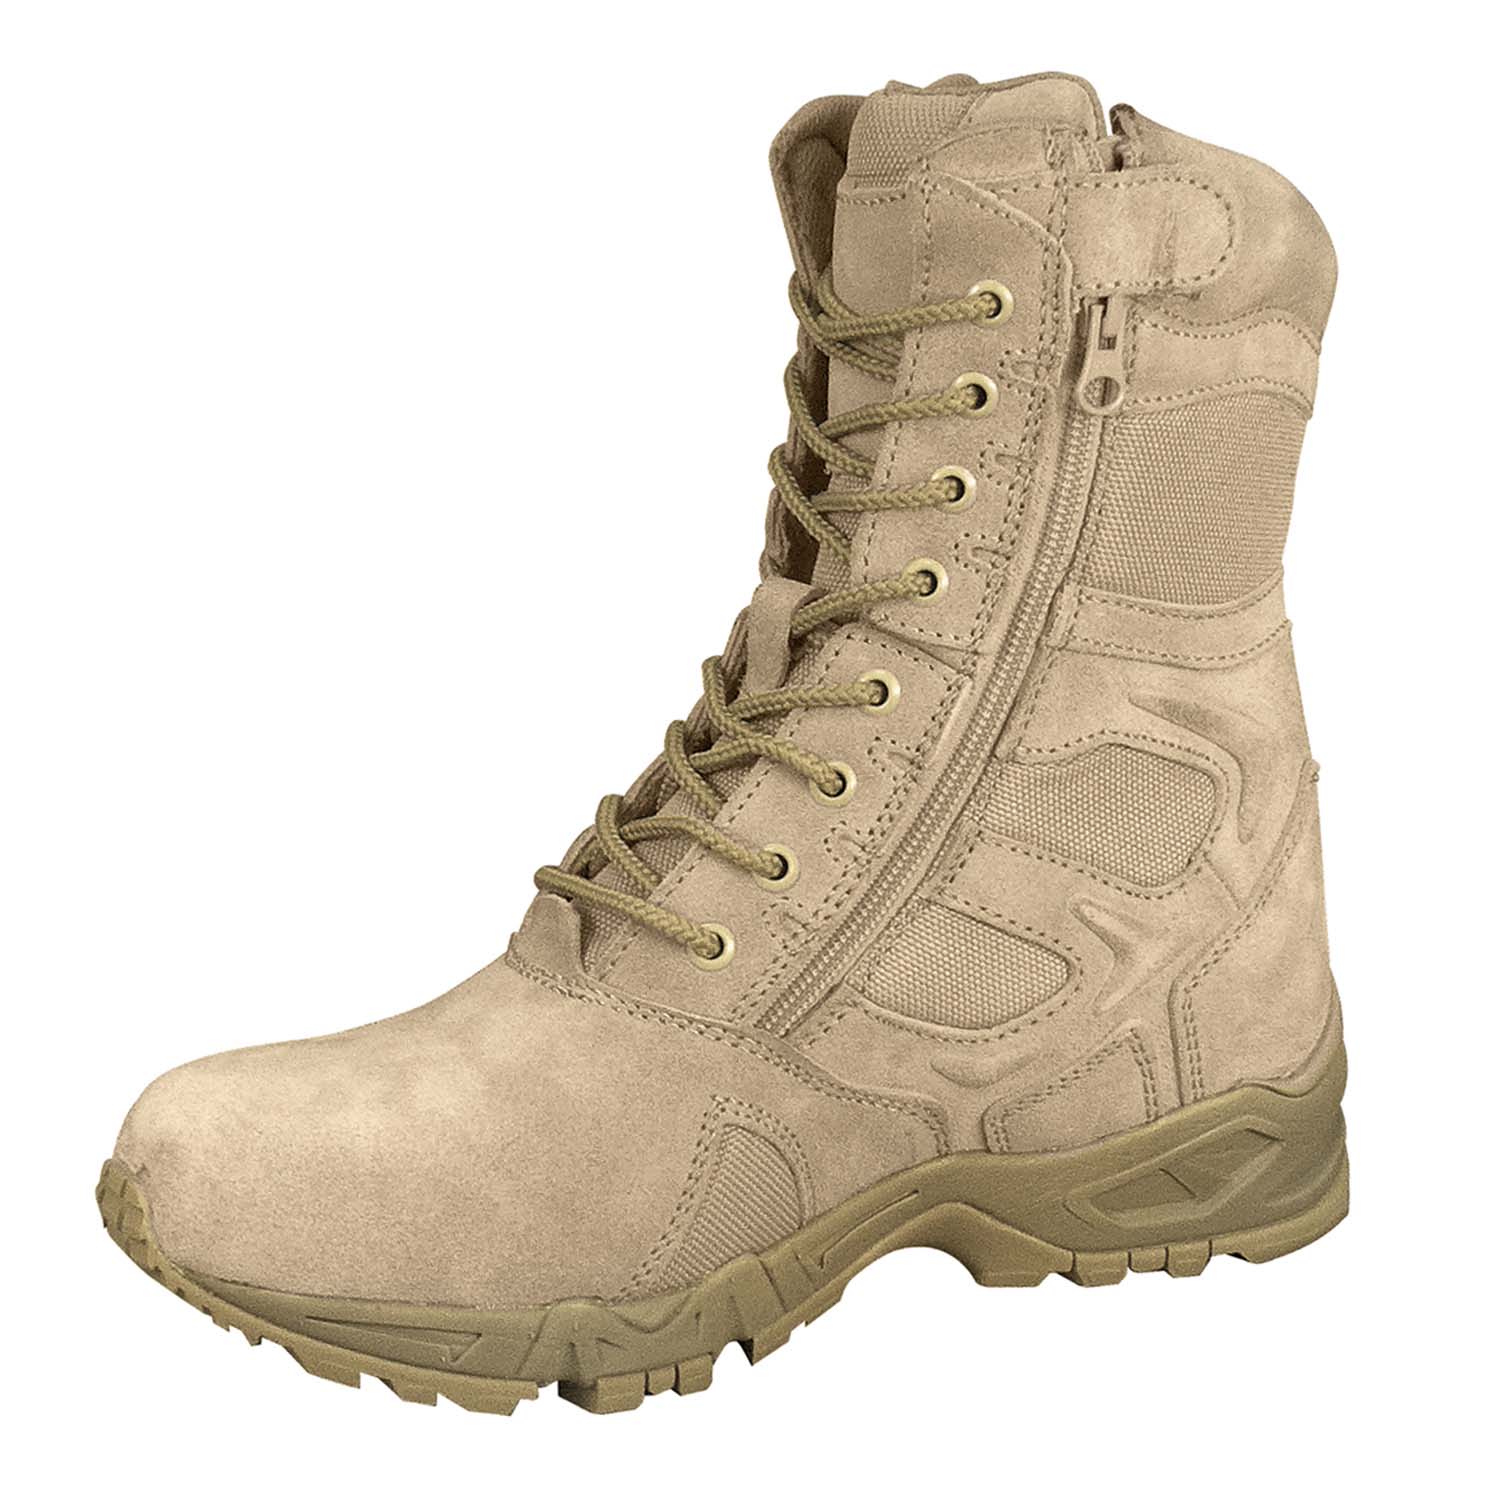 Boots - Rothco Forced Entry Deployment Boots With Side Zipper